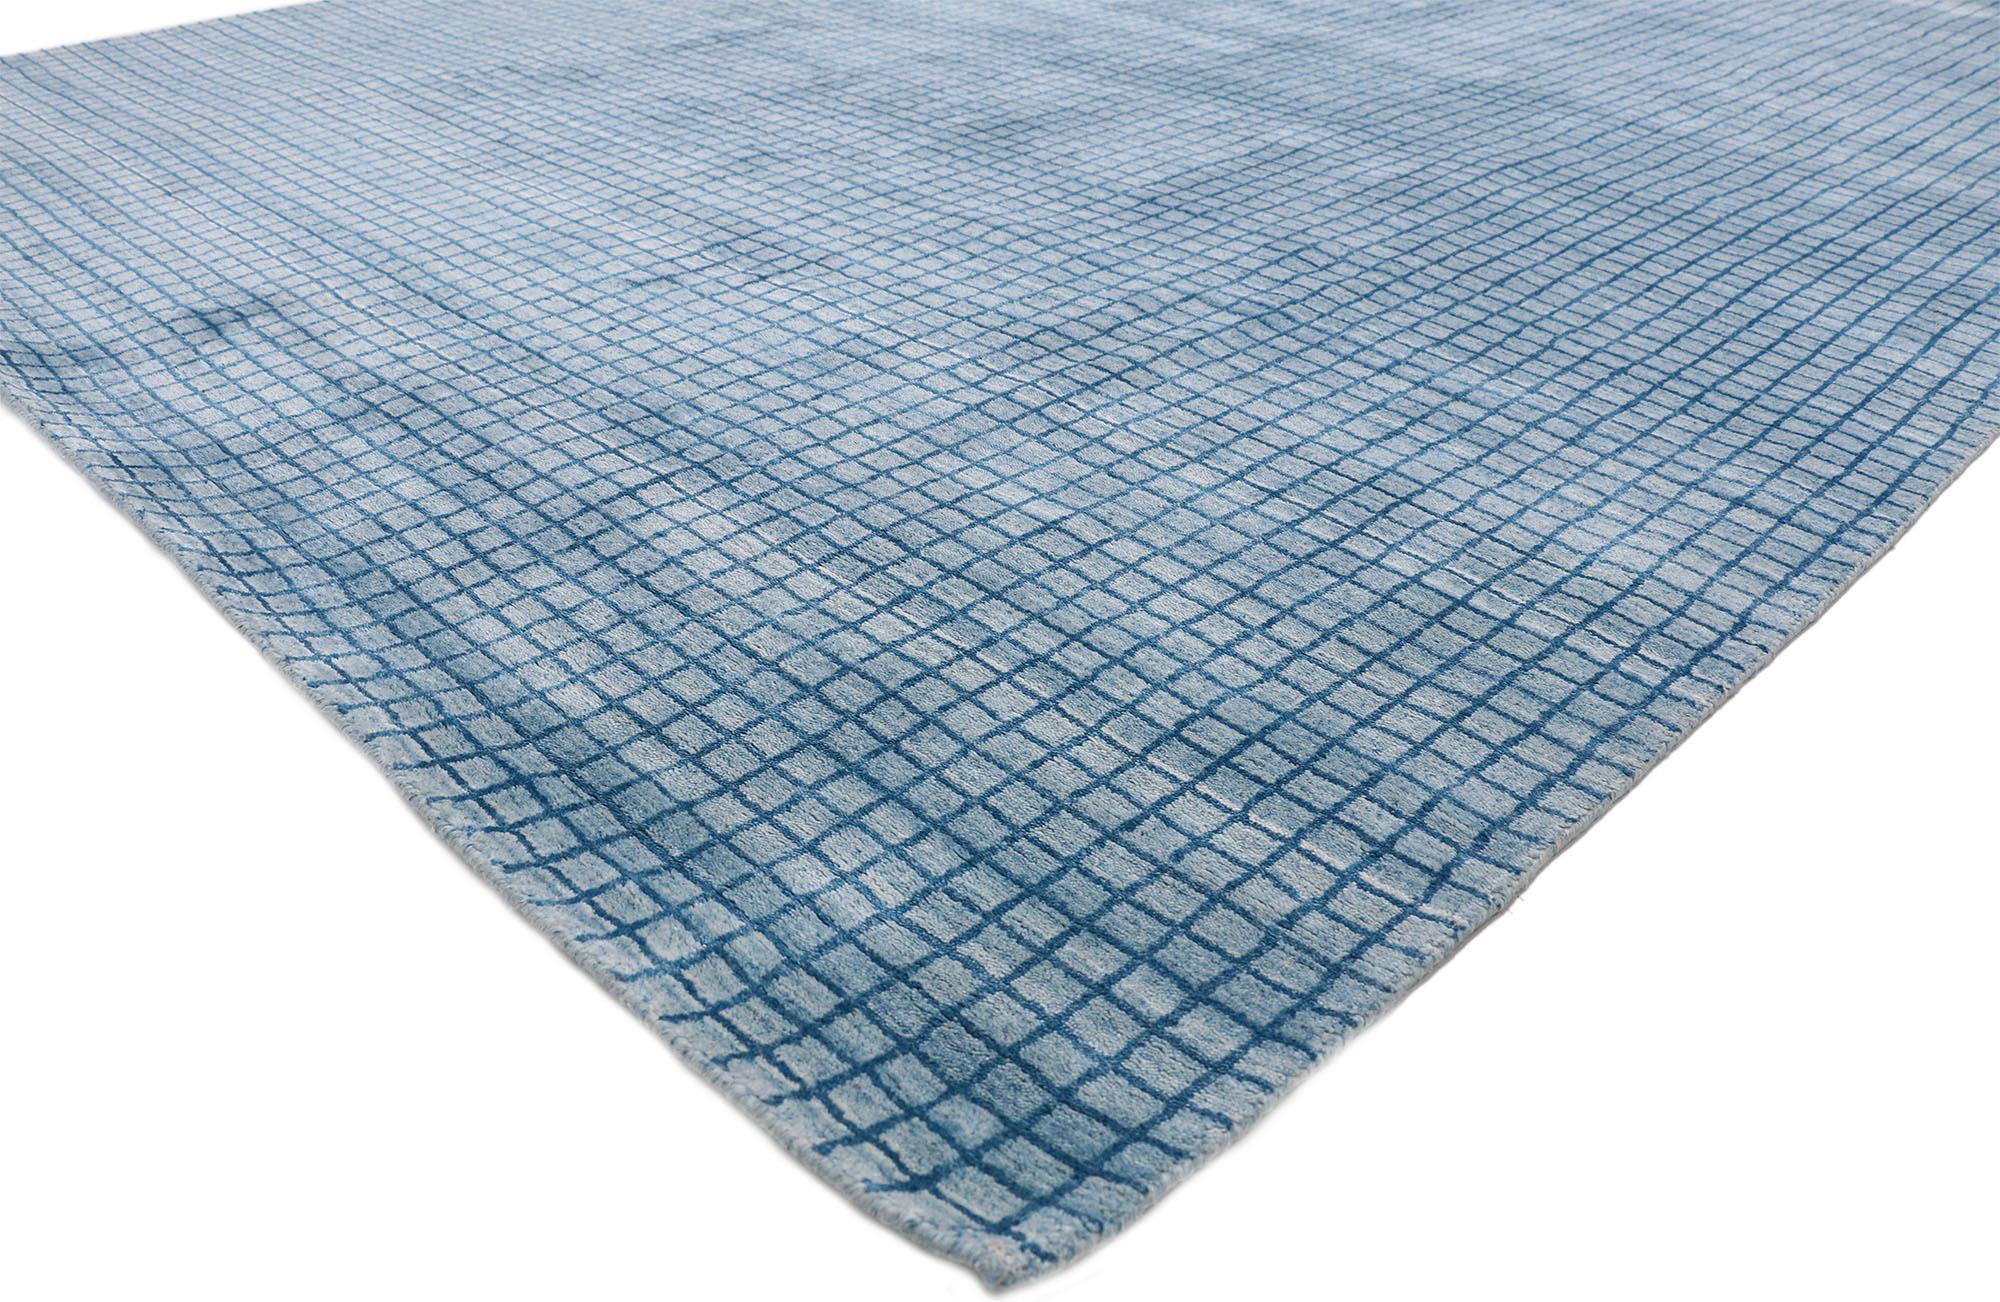 30436, contemporary Beach style area rug with grid pattern and Coastal Living style. This hand knotted wool modern beach style area rug features a simplistic all-over geometric pattern spread across an abrashed light sky blue backdrop the dark